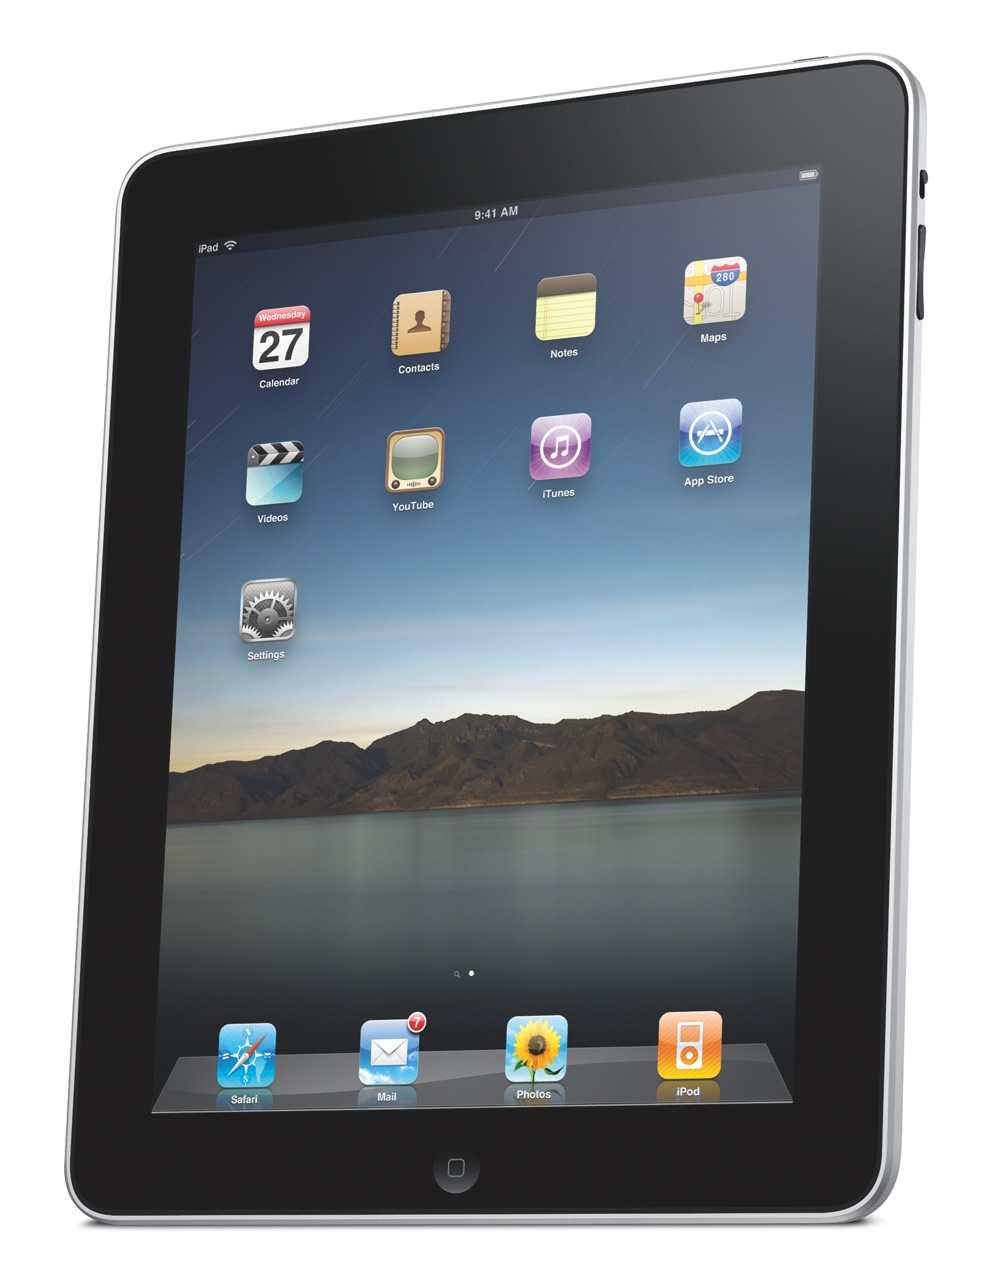 Hardware preview: Apple iPad | Raoul Pop